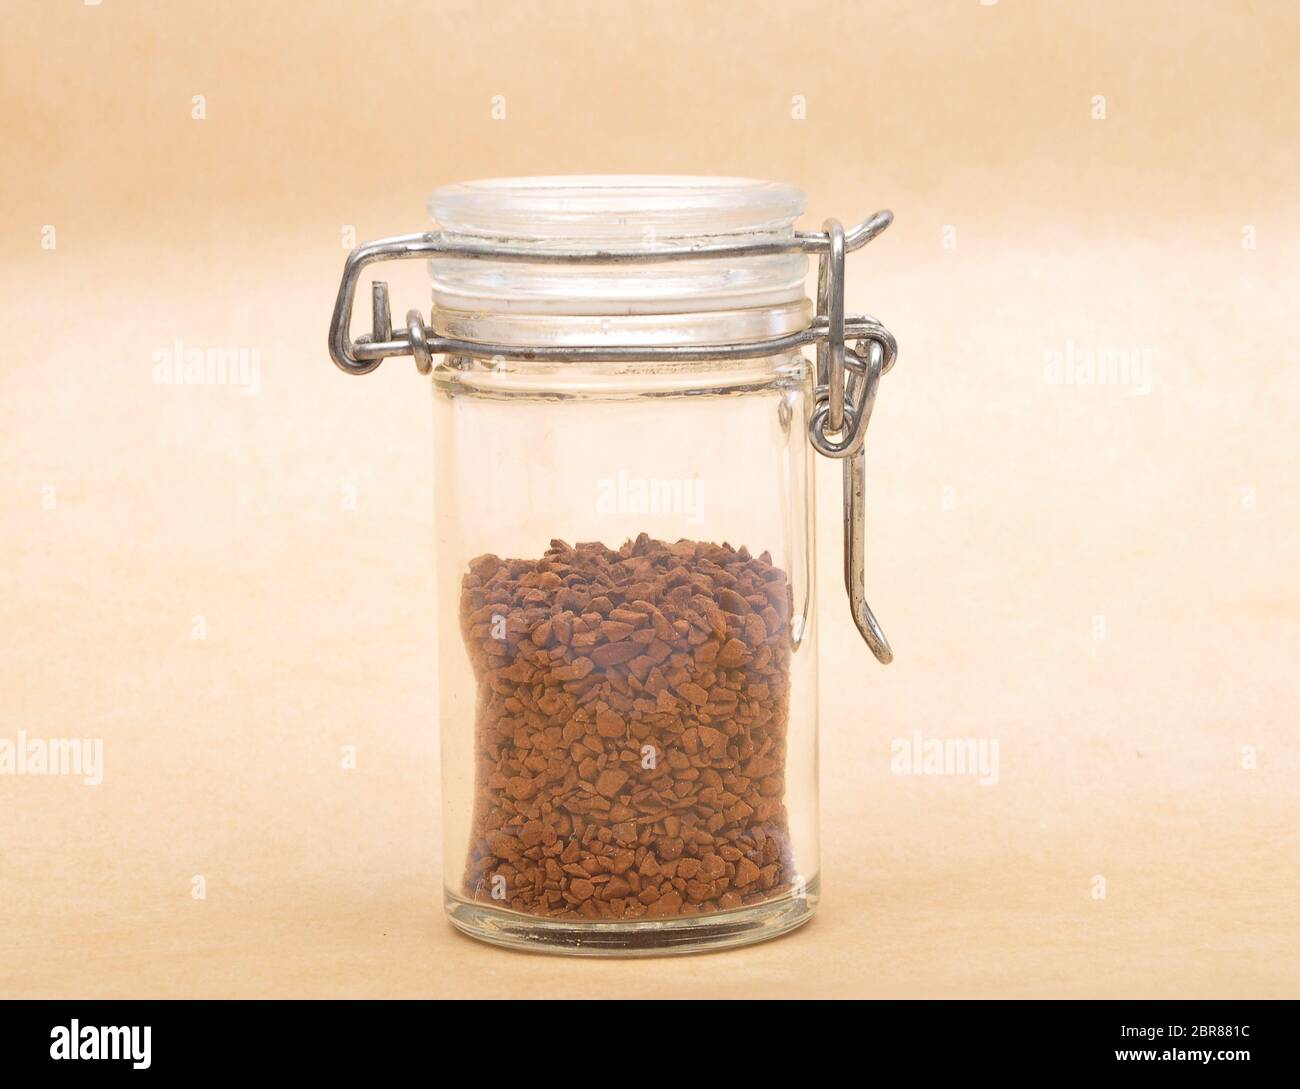 Instant Coffee in closed jar on brown background Stock Photo